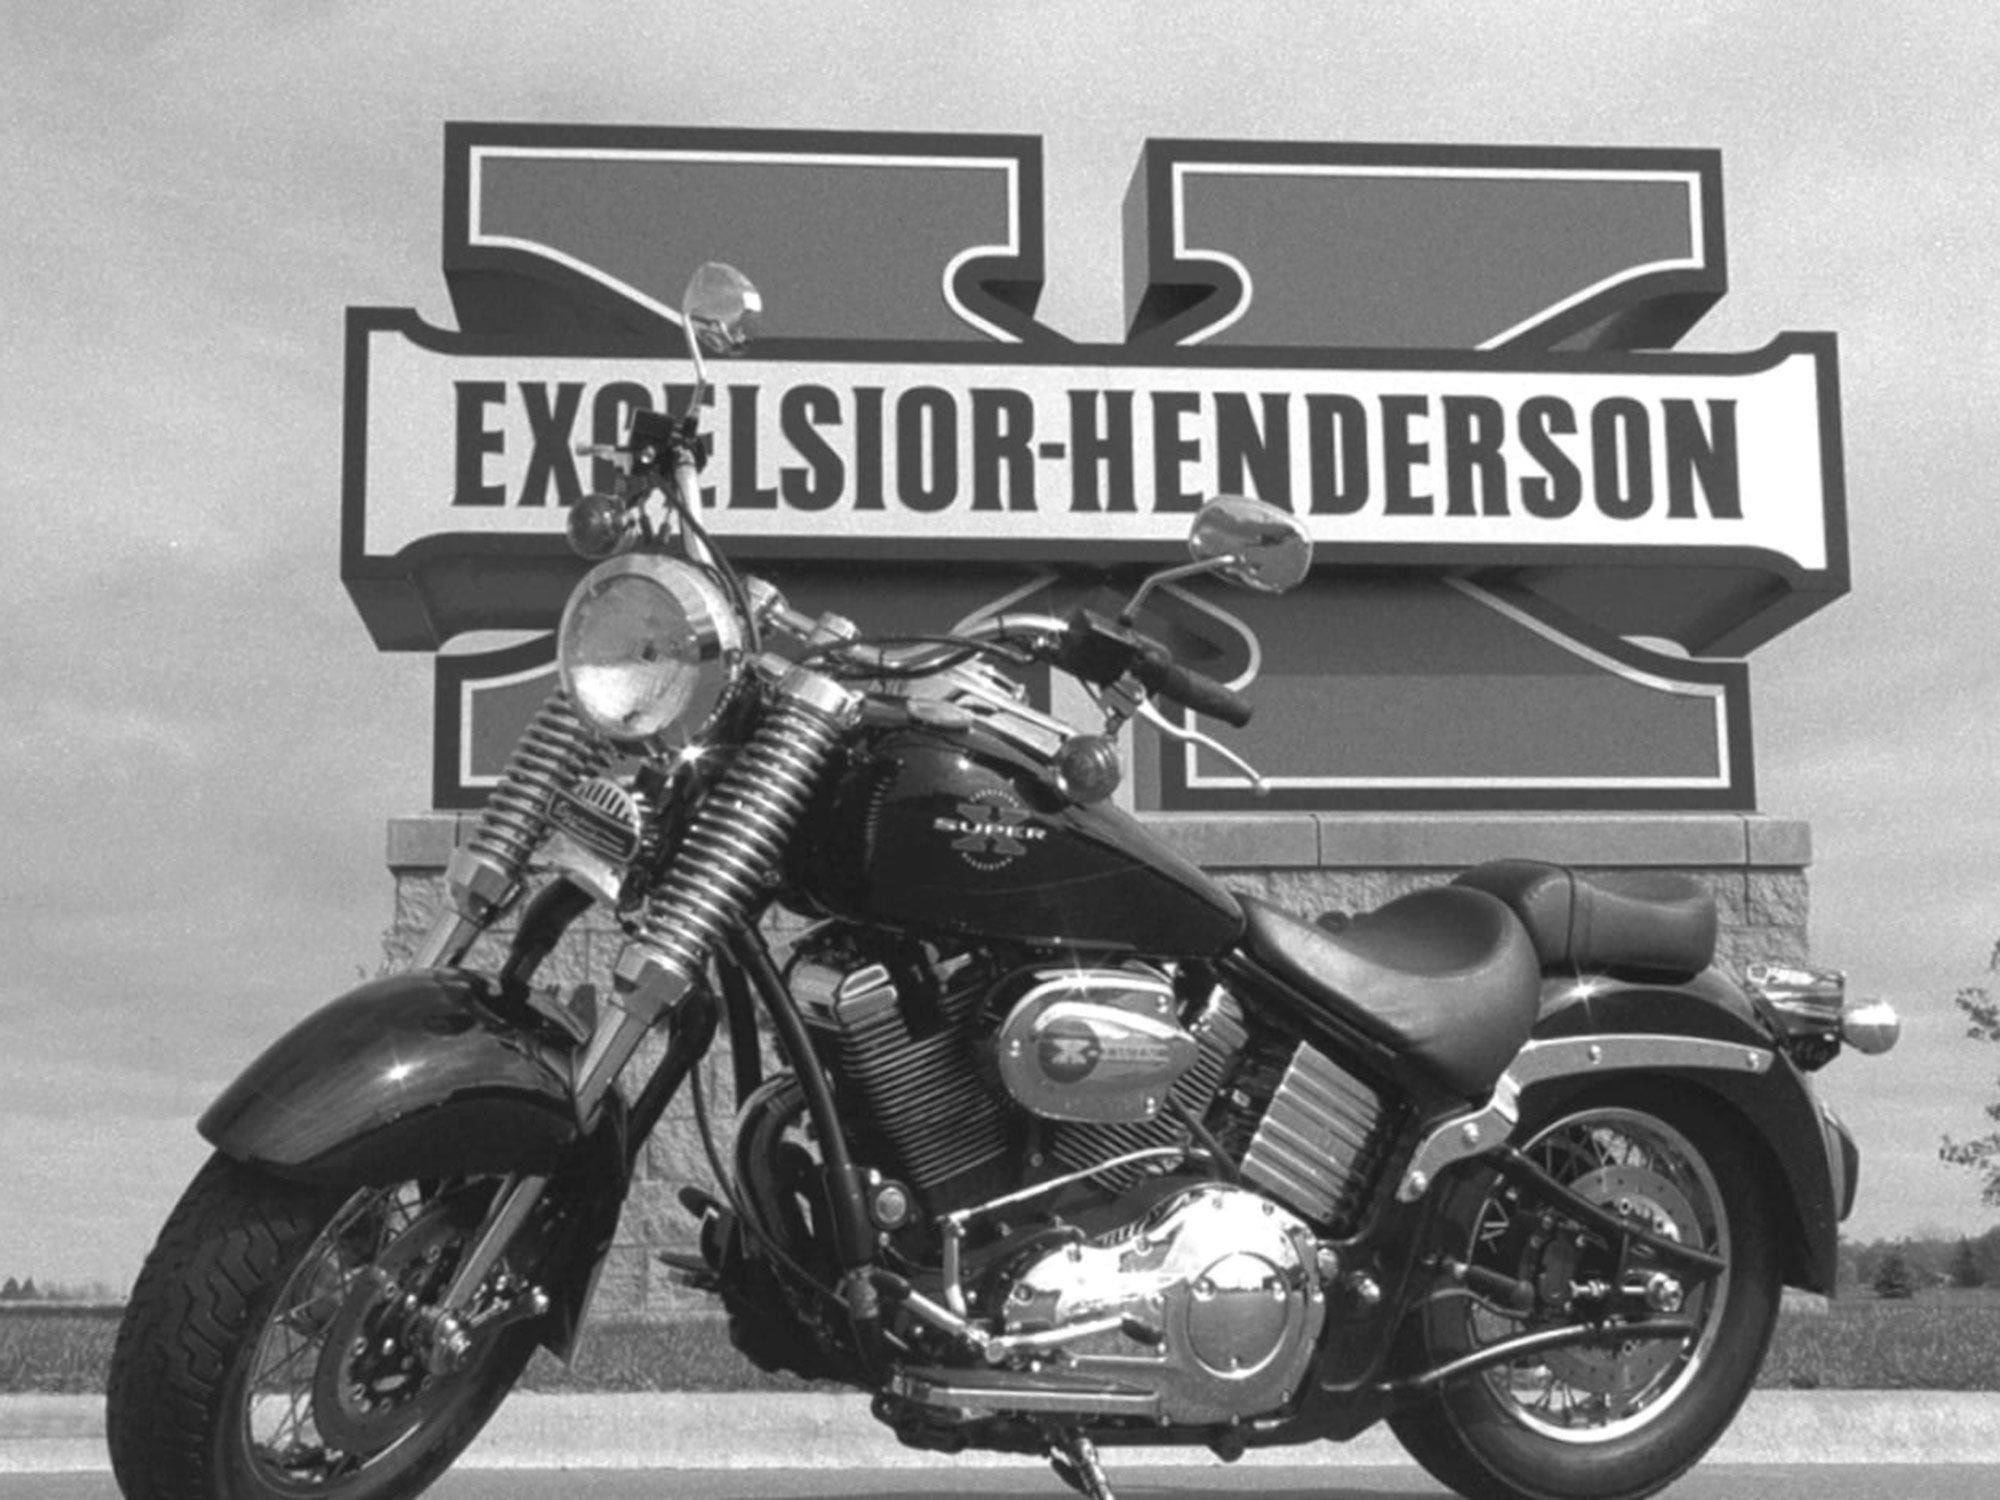 Excelsior-Henderson naming rights were recently bought by India’s Bajaj group, but we’re not sure if that means a new model is being developed.